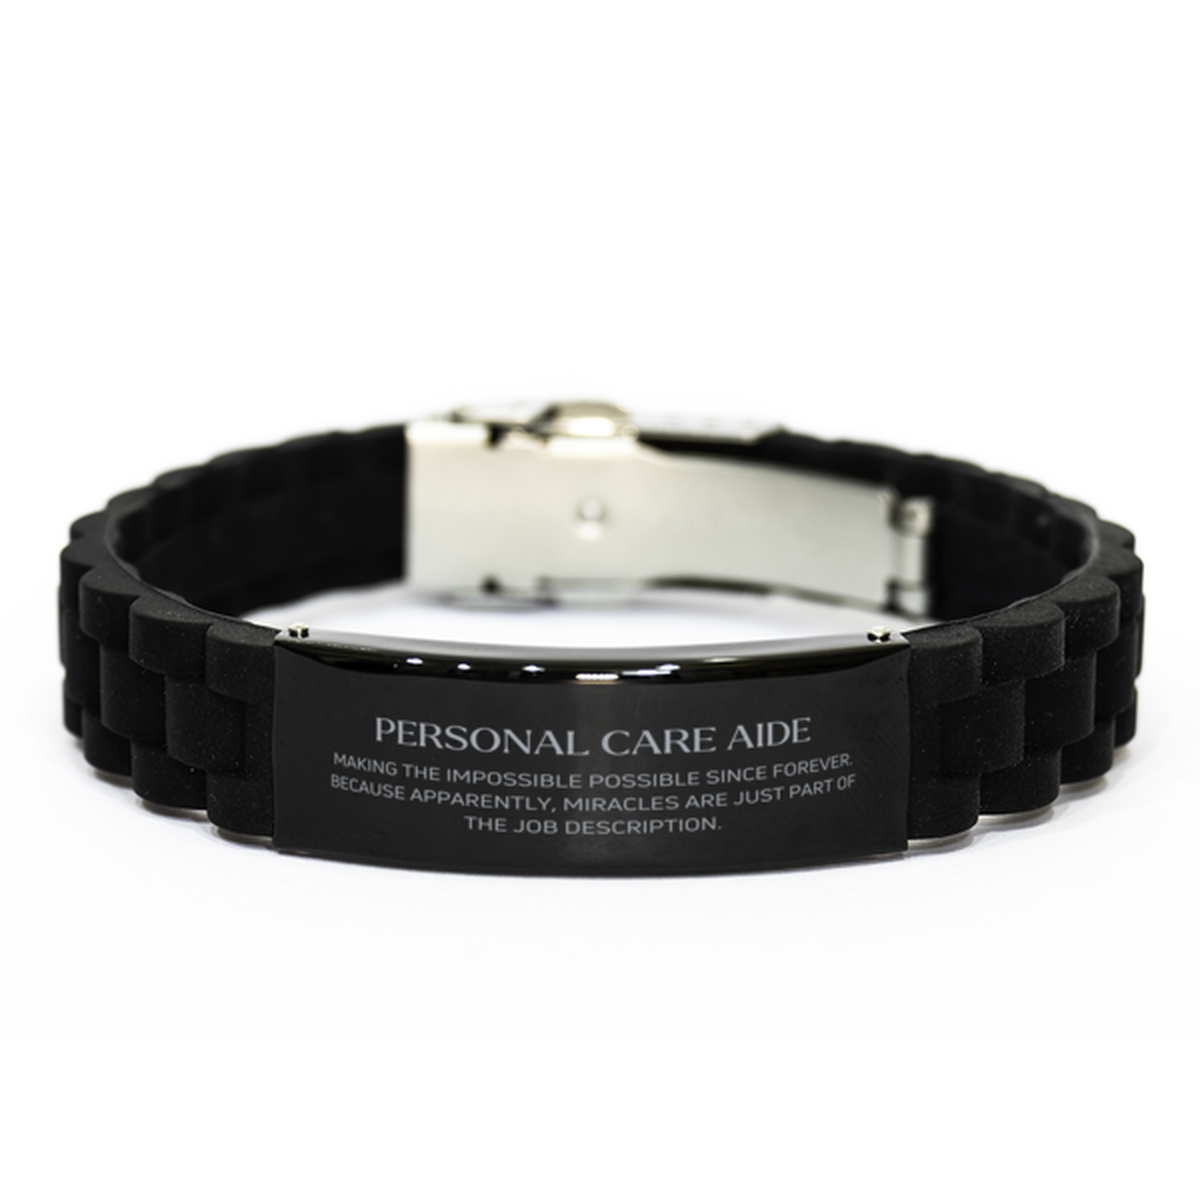 Funny Personal Care Aide Gifts, Miracles are just part of the job description, Inspirational Birthday Black Glidelock Clasp Bracelet For Personal Care Aide, Men, Women, Coworkers, Friends, Boss